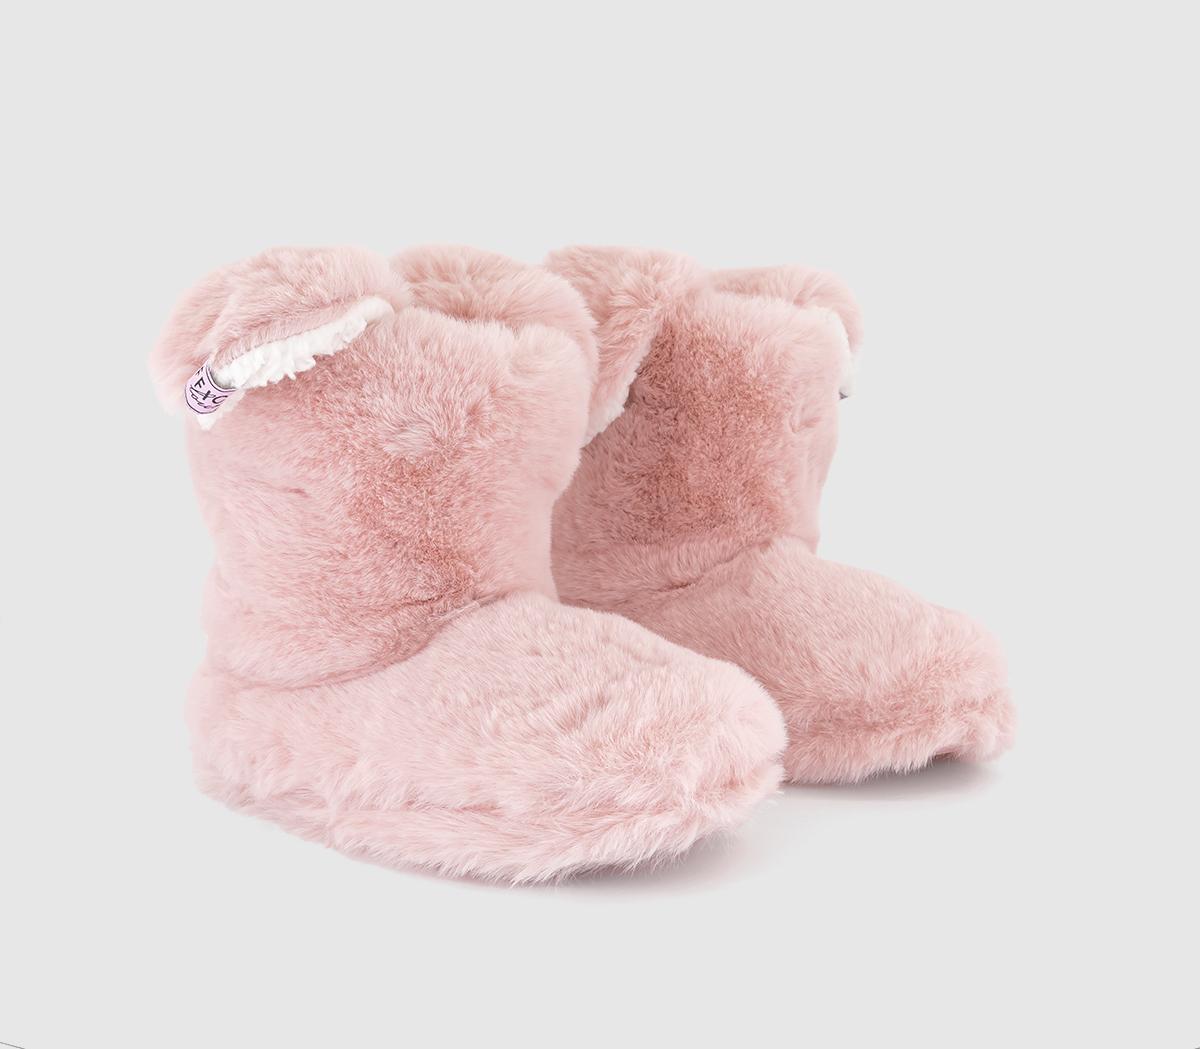 OFFICE Lounge Womens Ruby Bunny Slipper Boots New Pink, 3-4